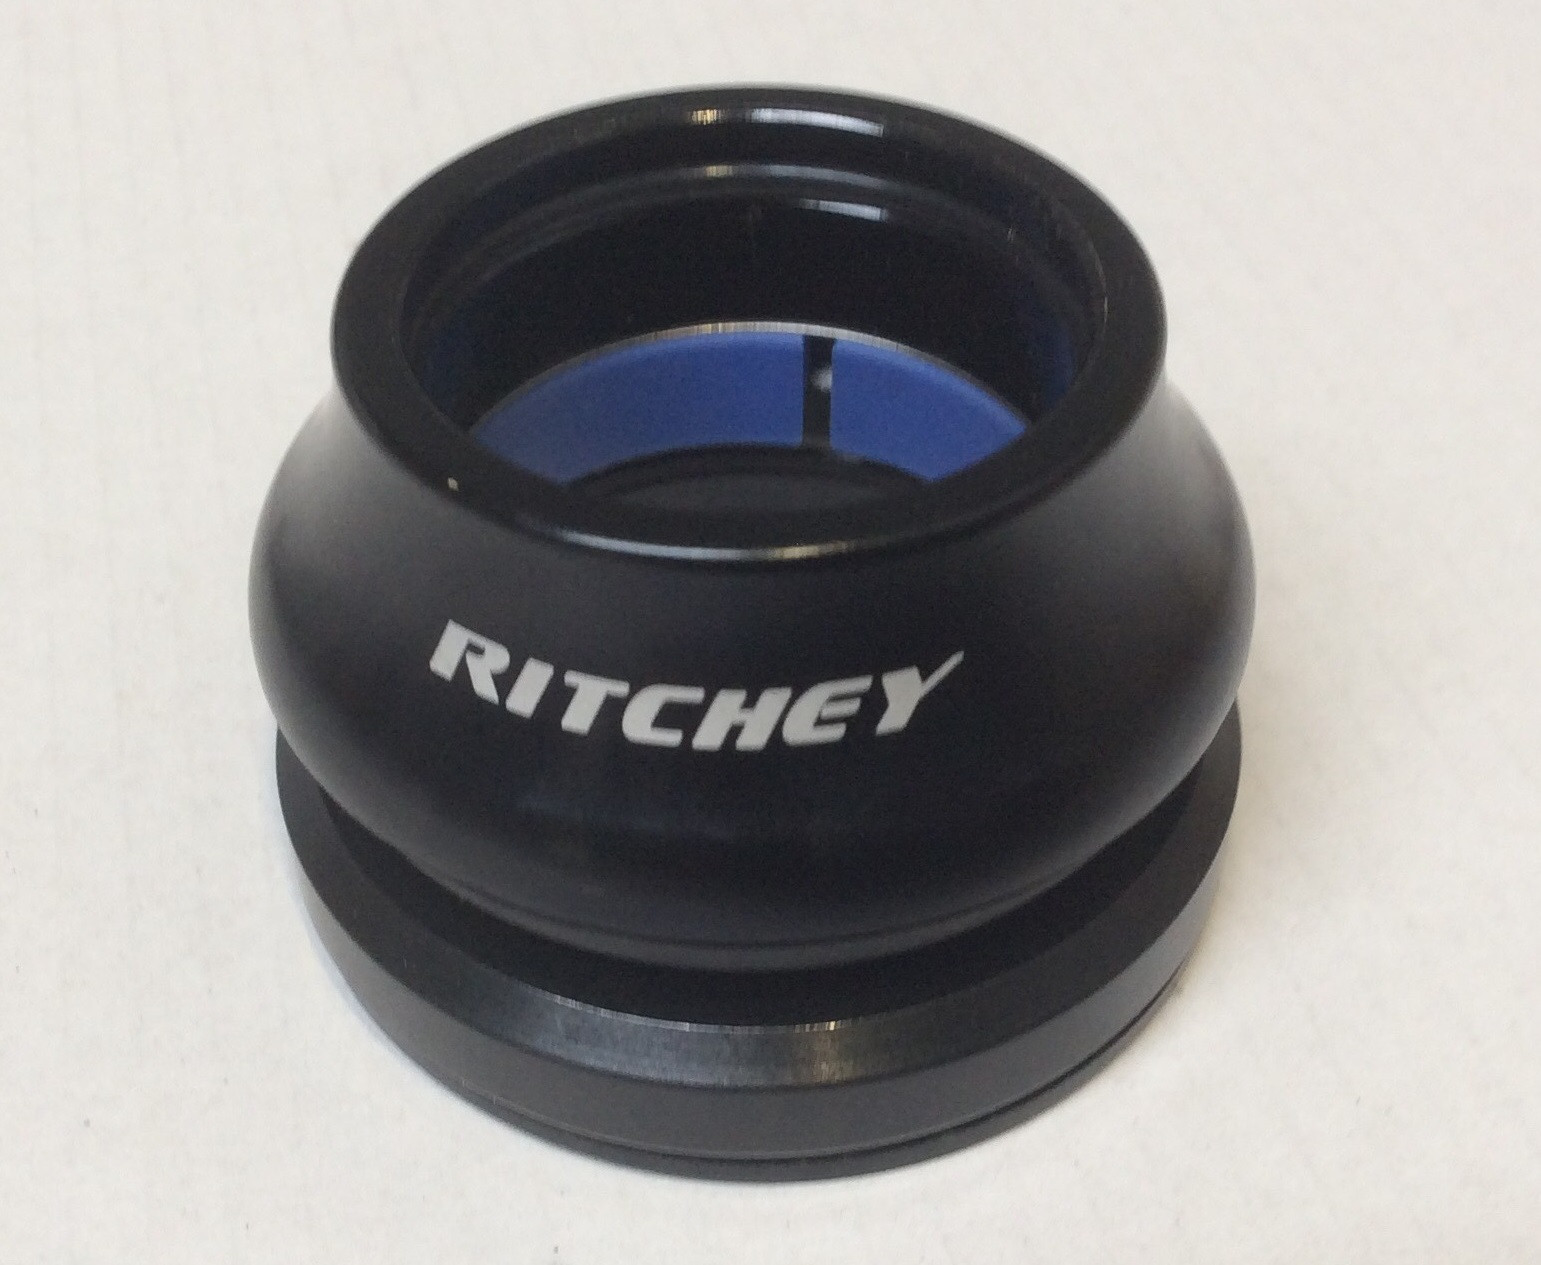 RITCHEY Headset COMP Drop in Tapered Black (197501080099)